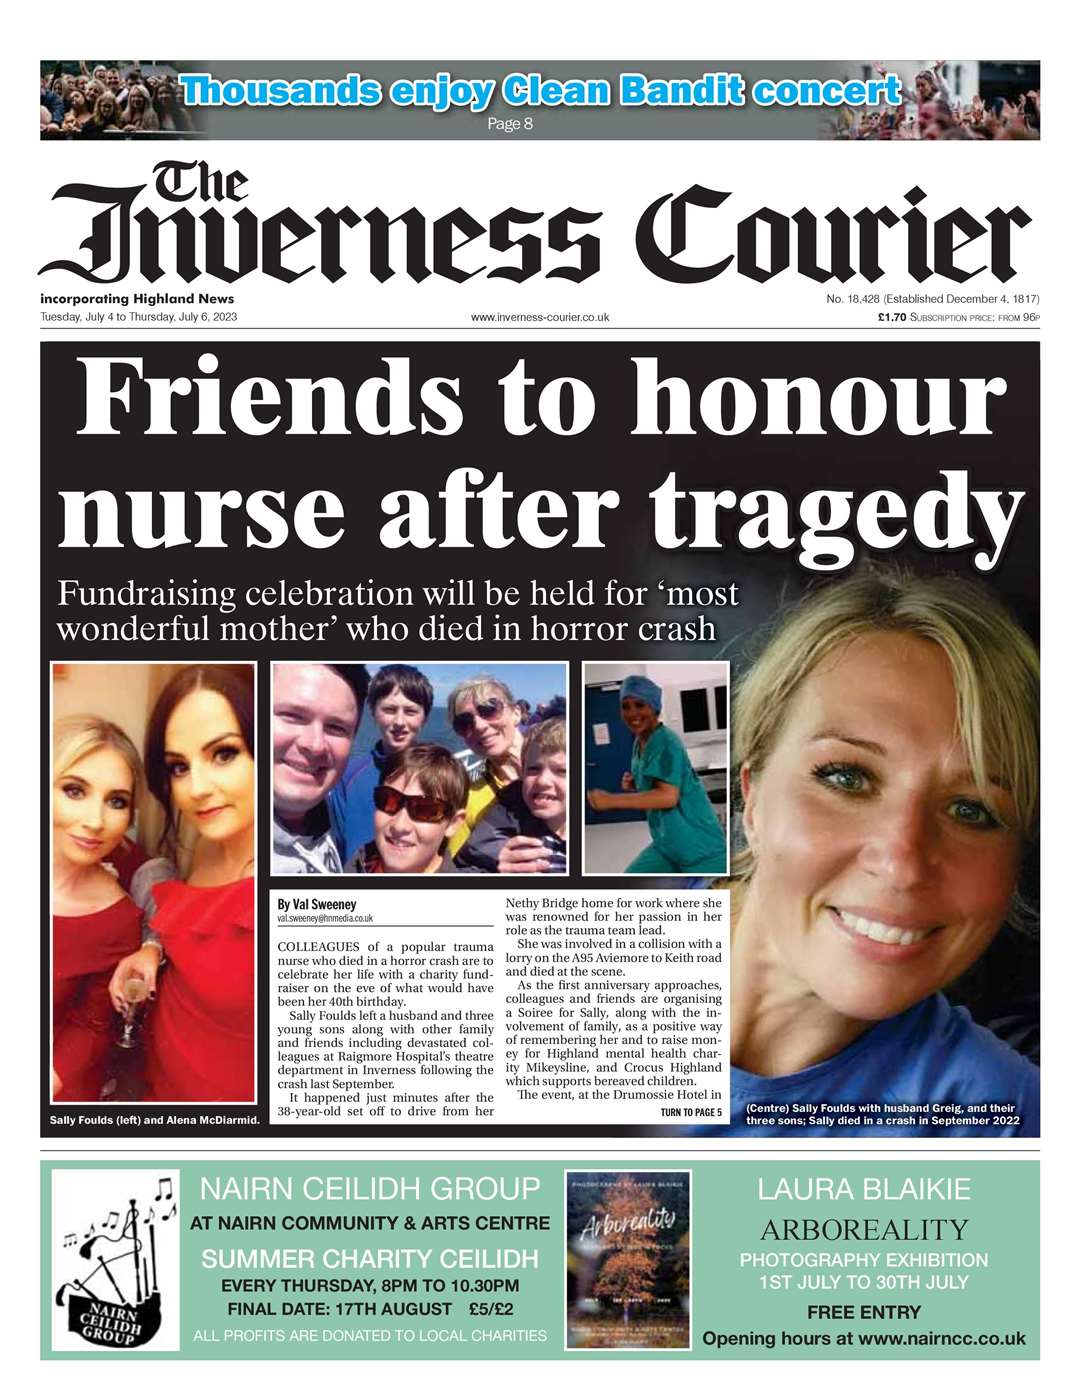 The Inverness Courier, July 4, front page.